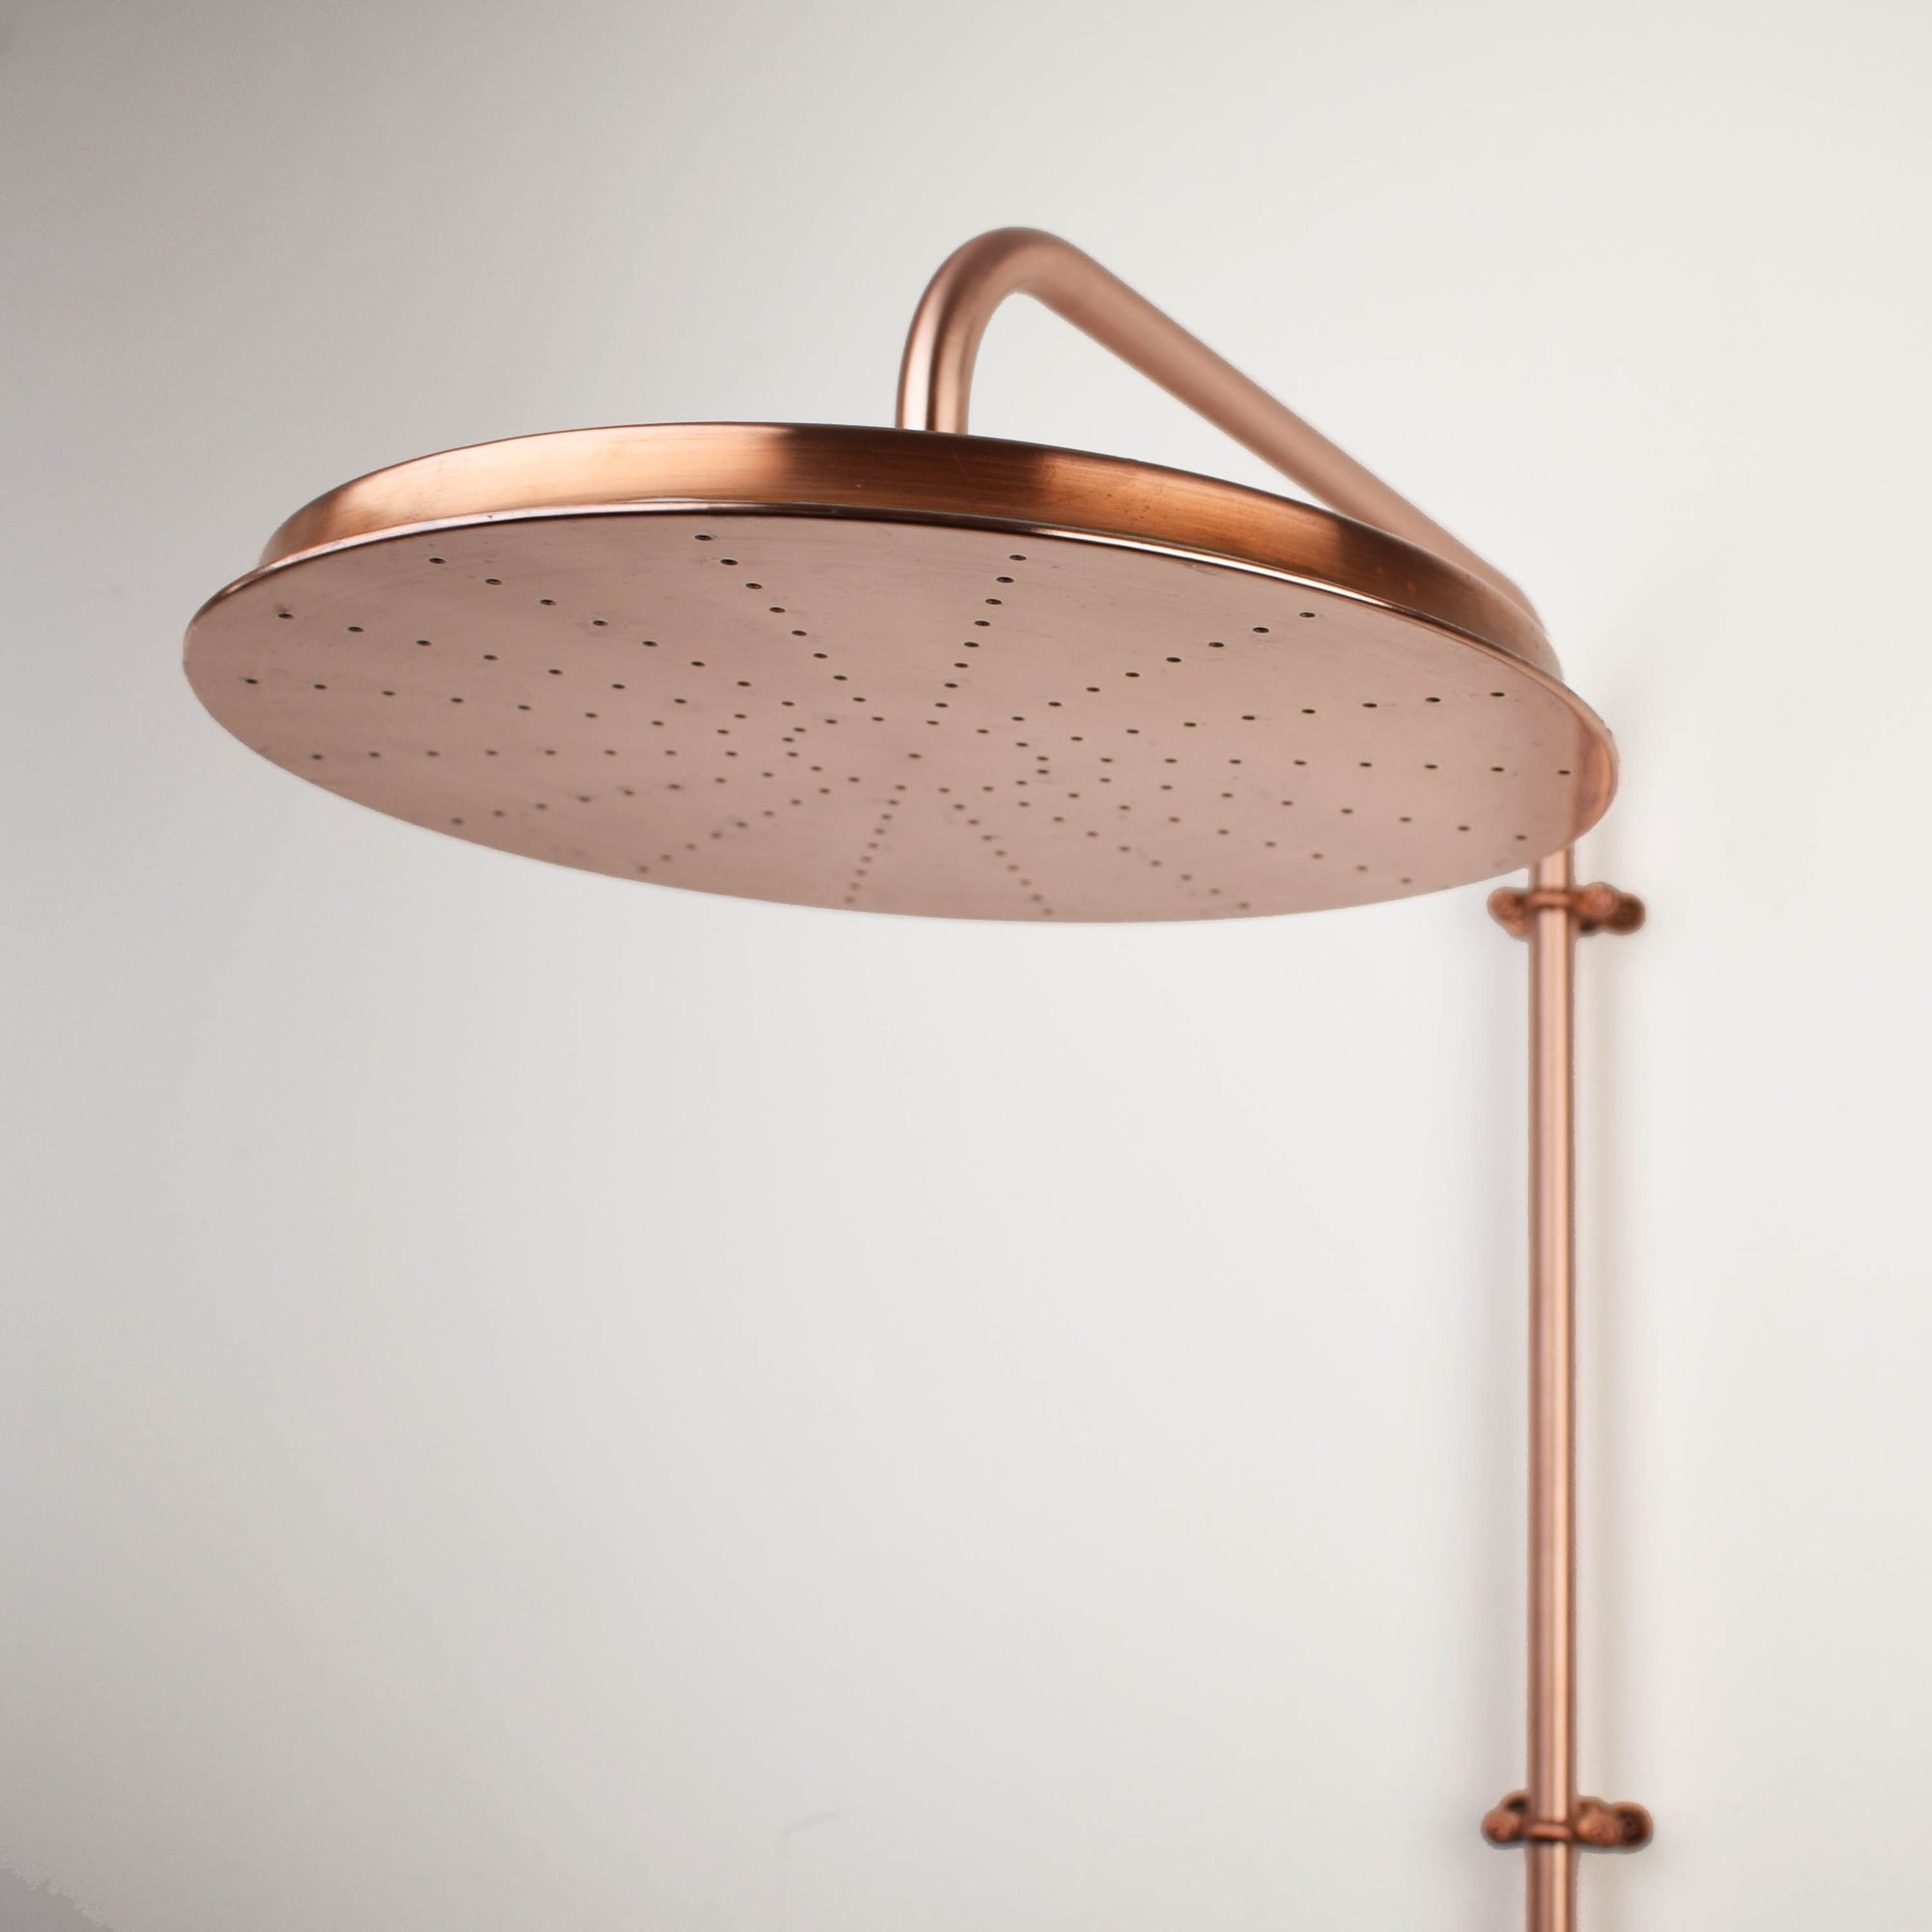 Enjoy the benefits of a copper shower head, which is known to improve water quality and promote healthy hair and skin.